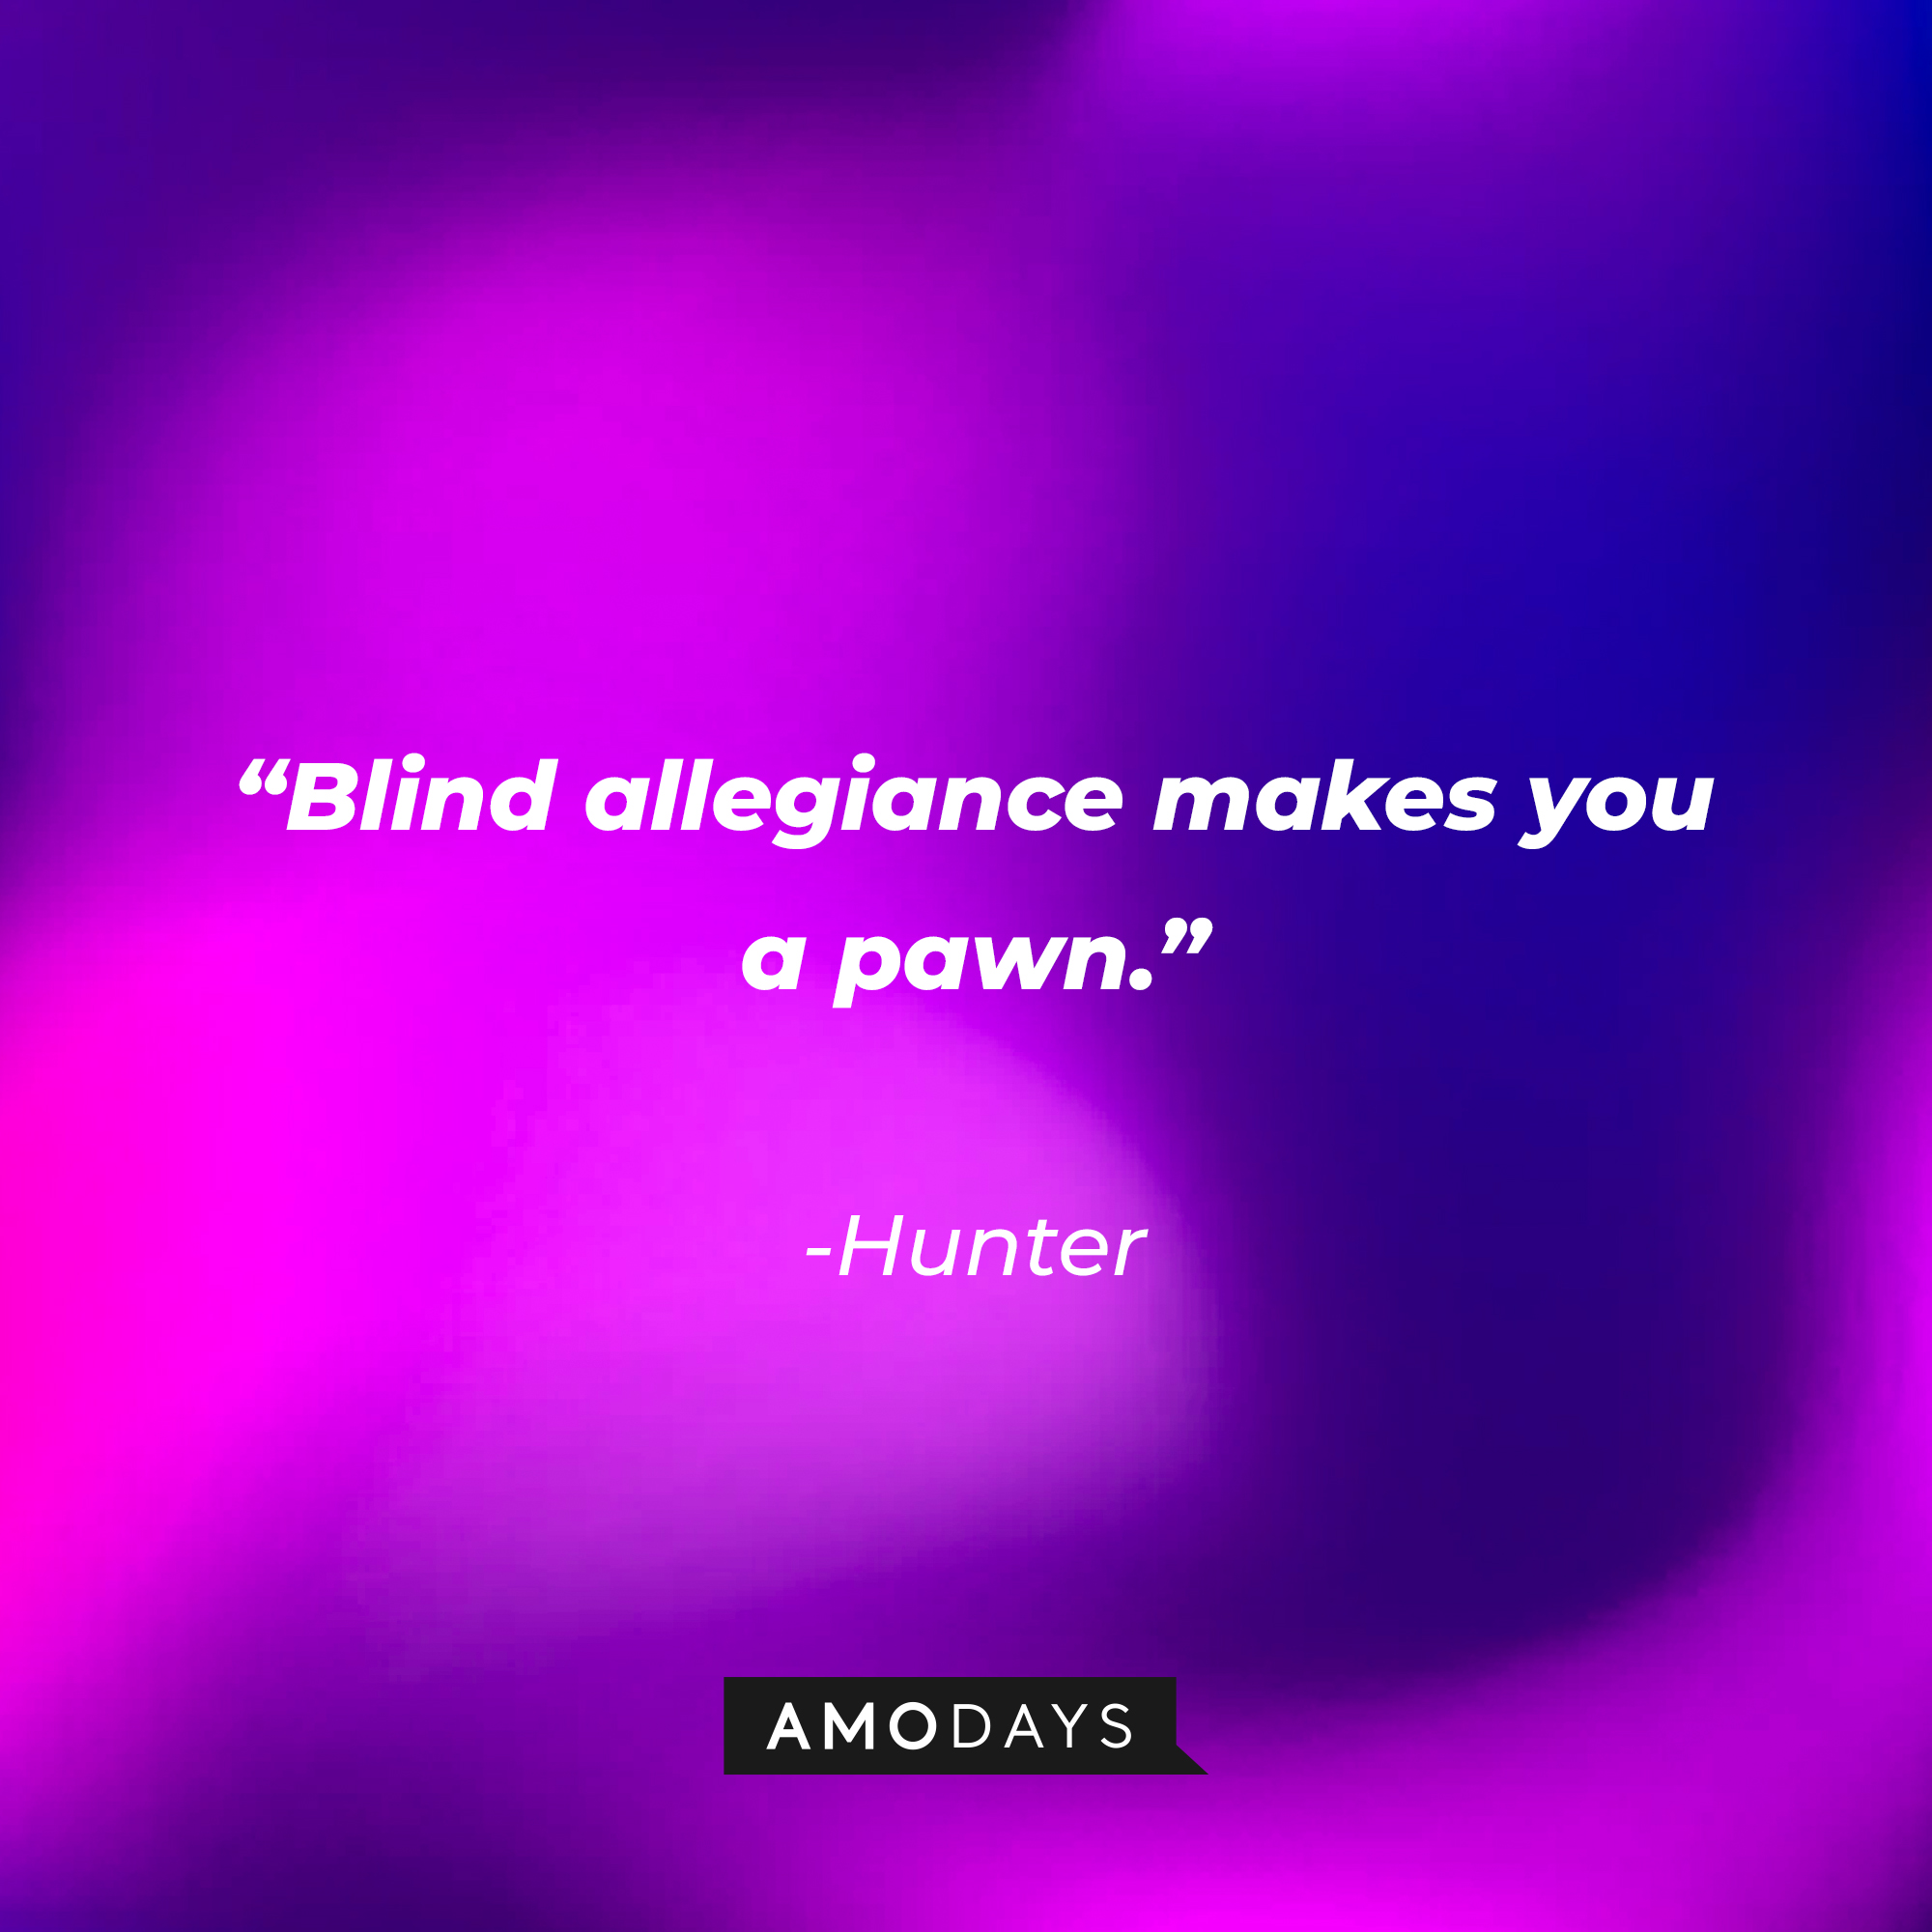 Hunter’s quote: "Blind allegiance makes you a pawn.”  | Source: AmoDays